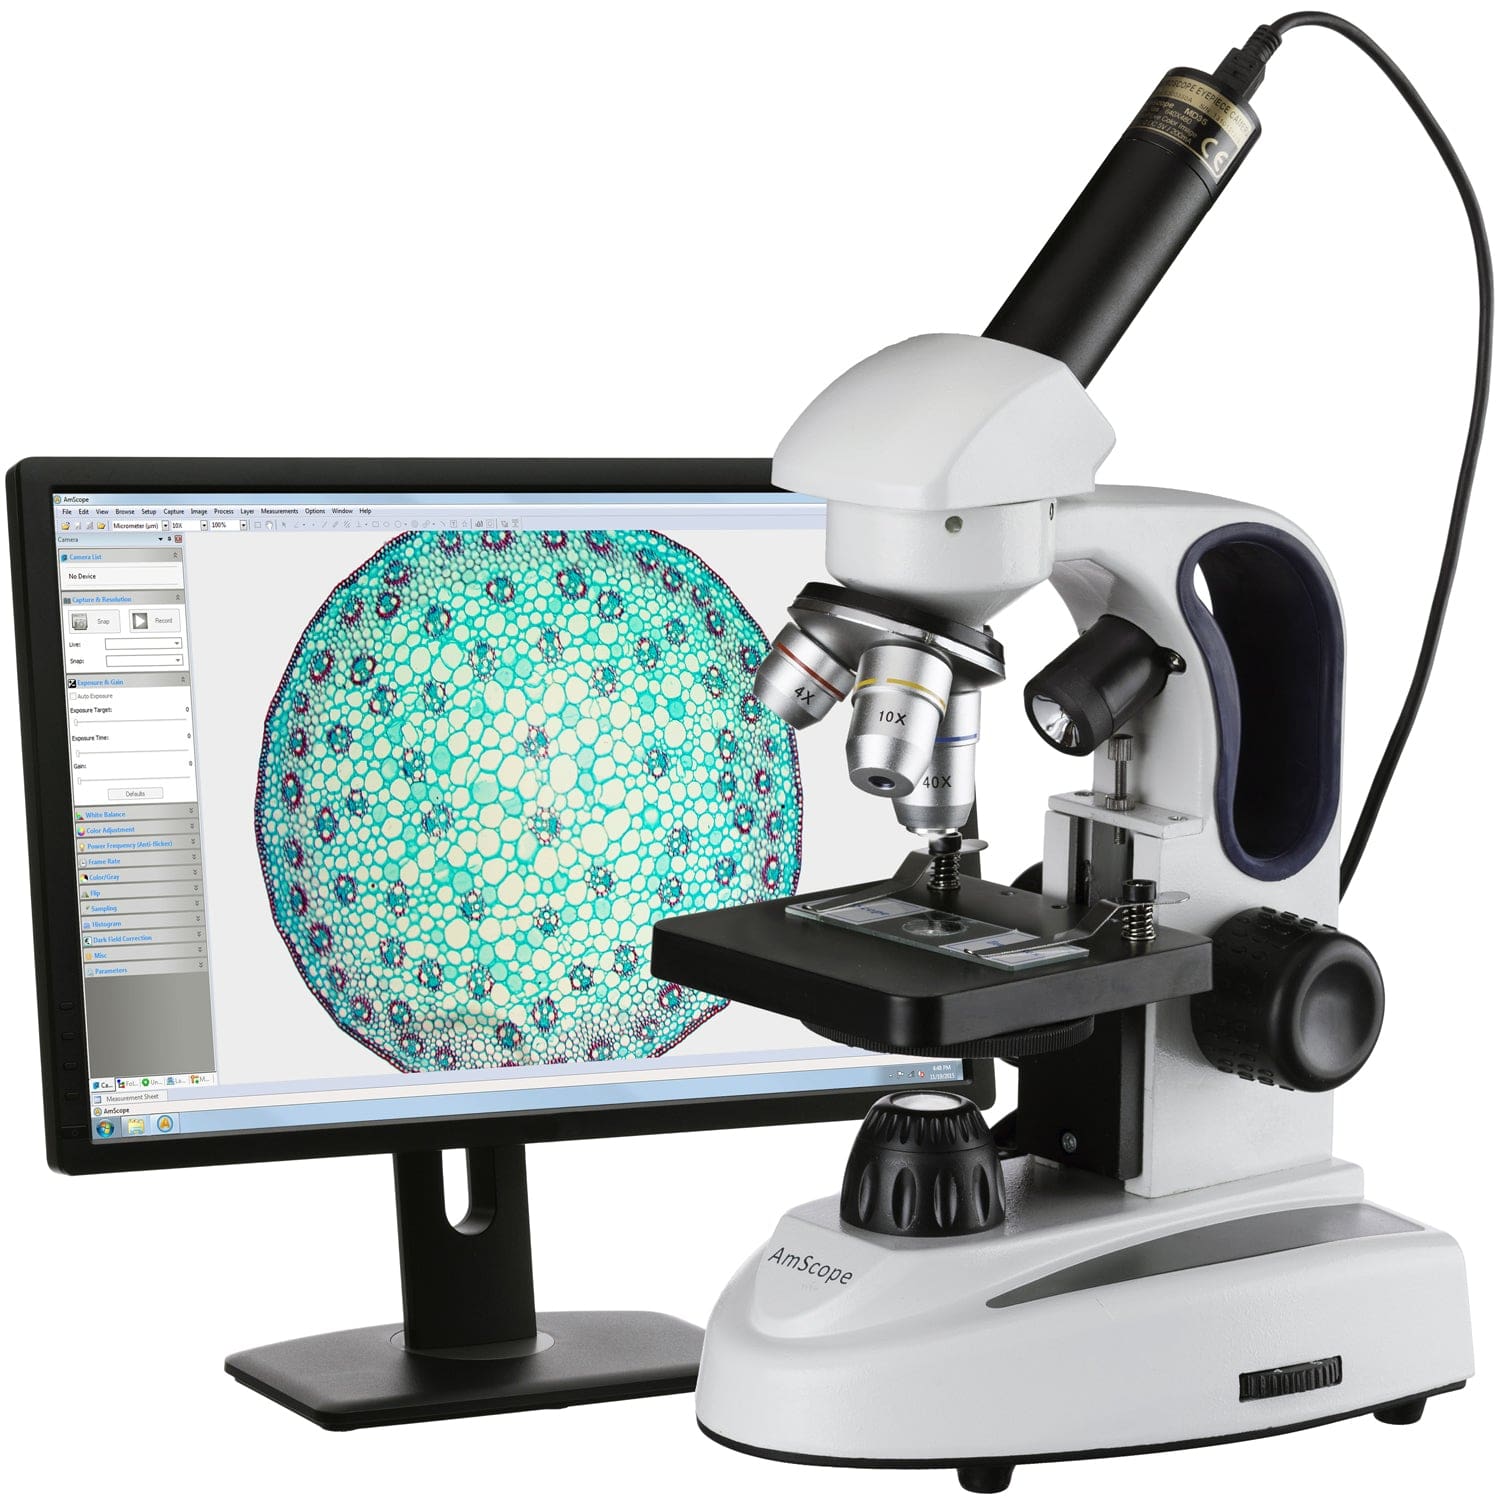 100X Zoom Clip-on Microscope with LED Light, Magnifying Lens Glass